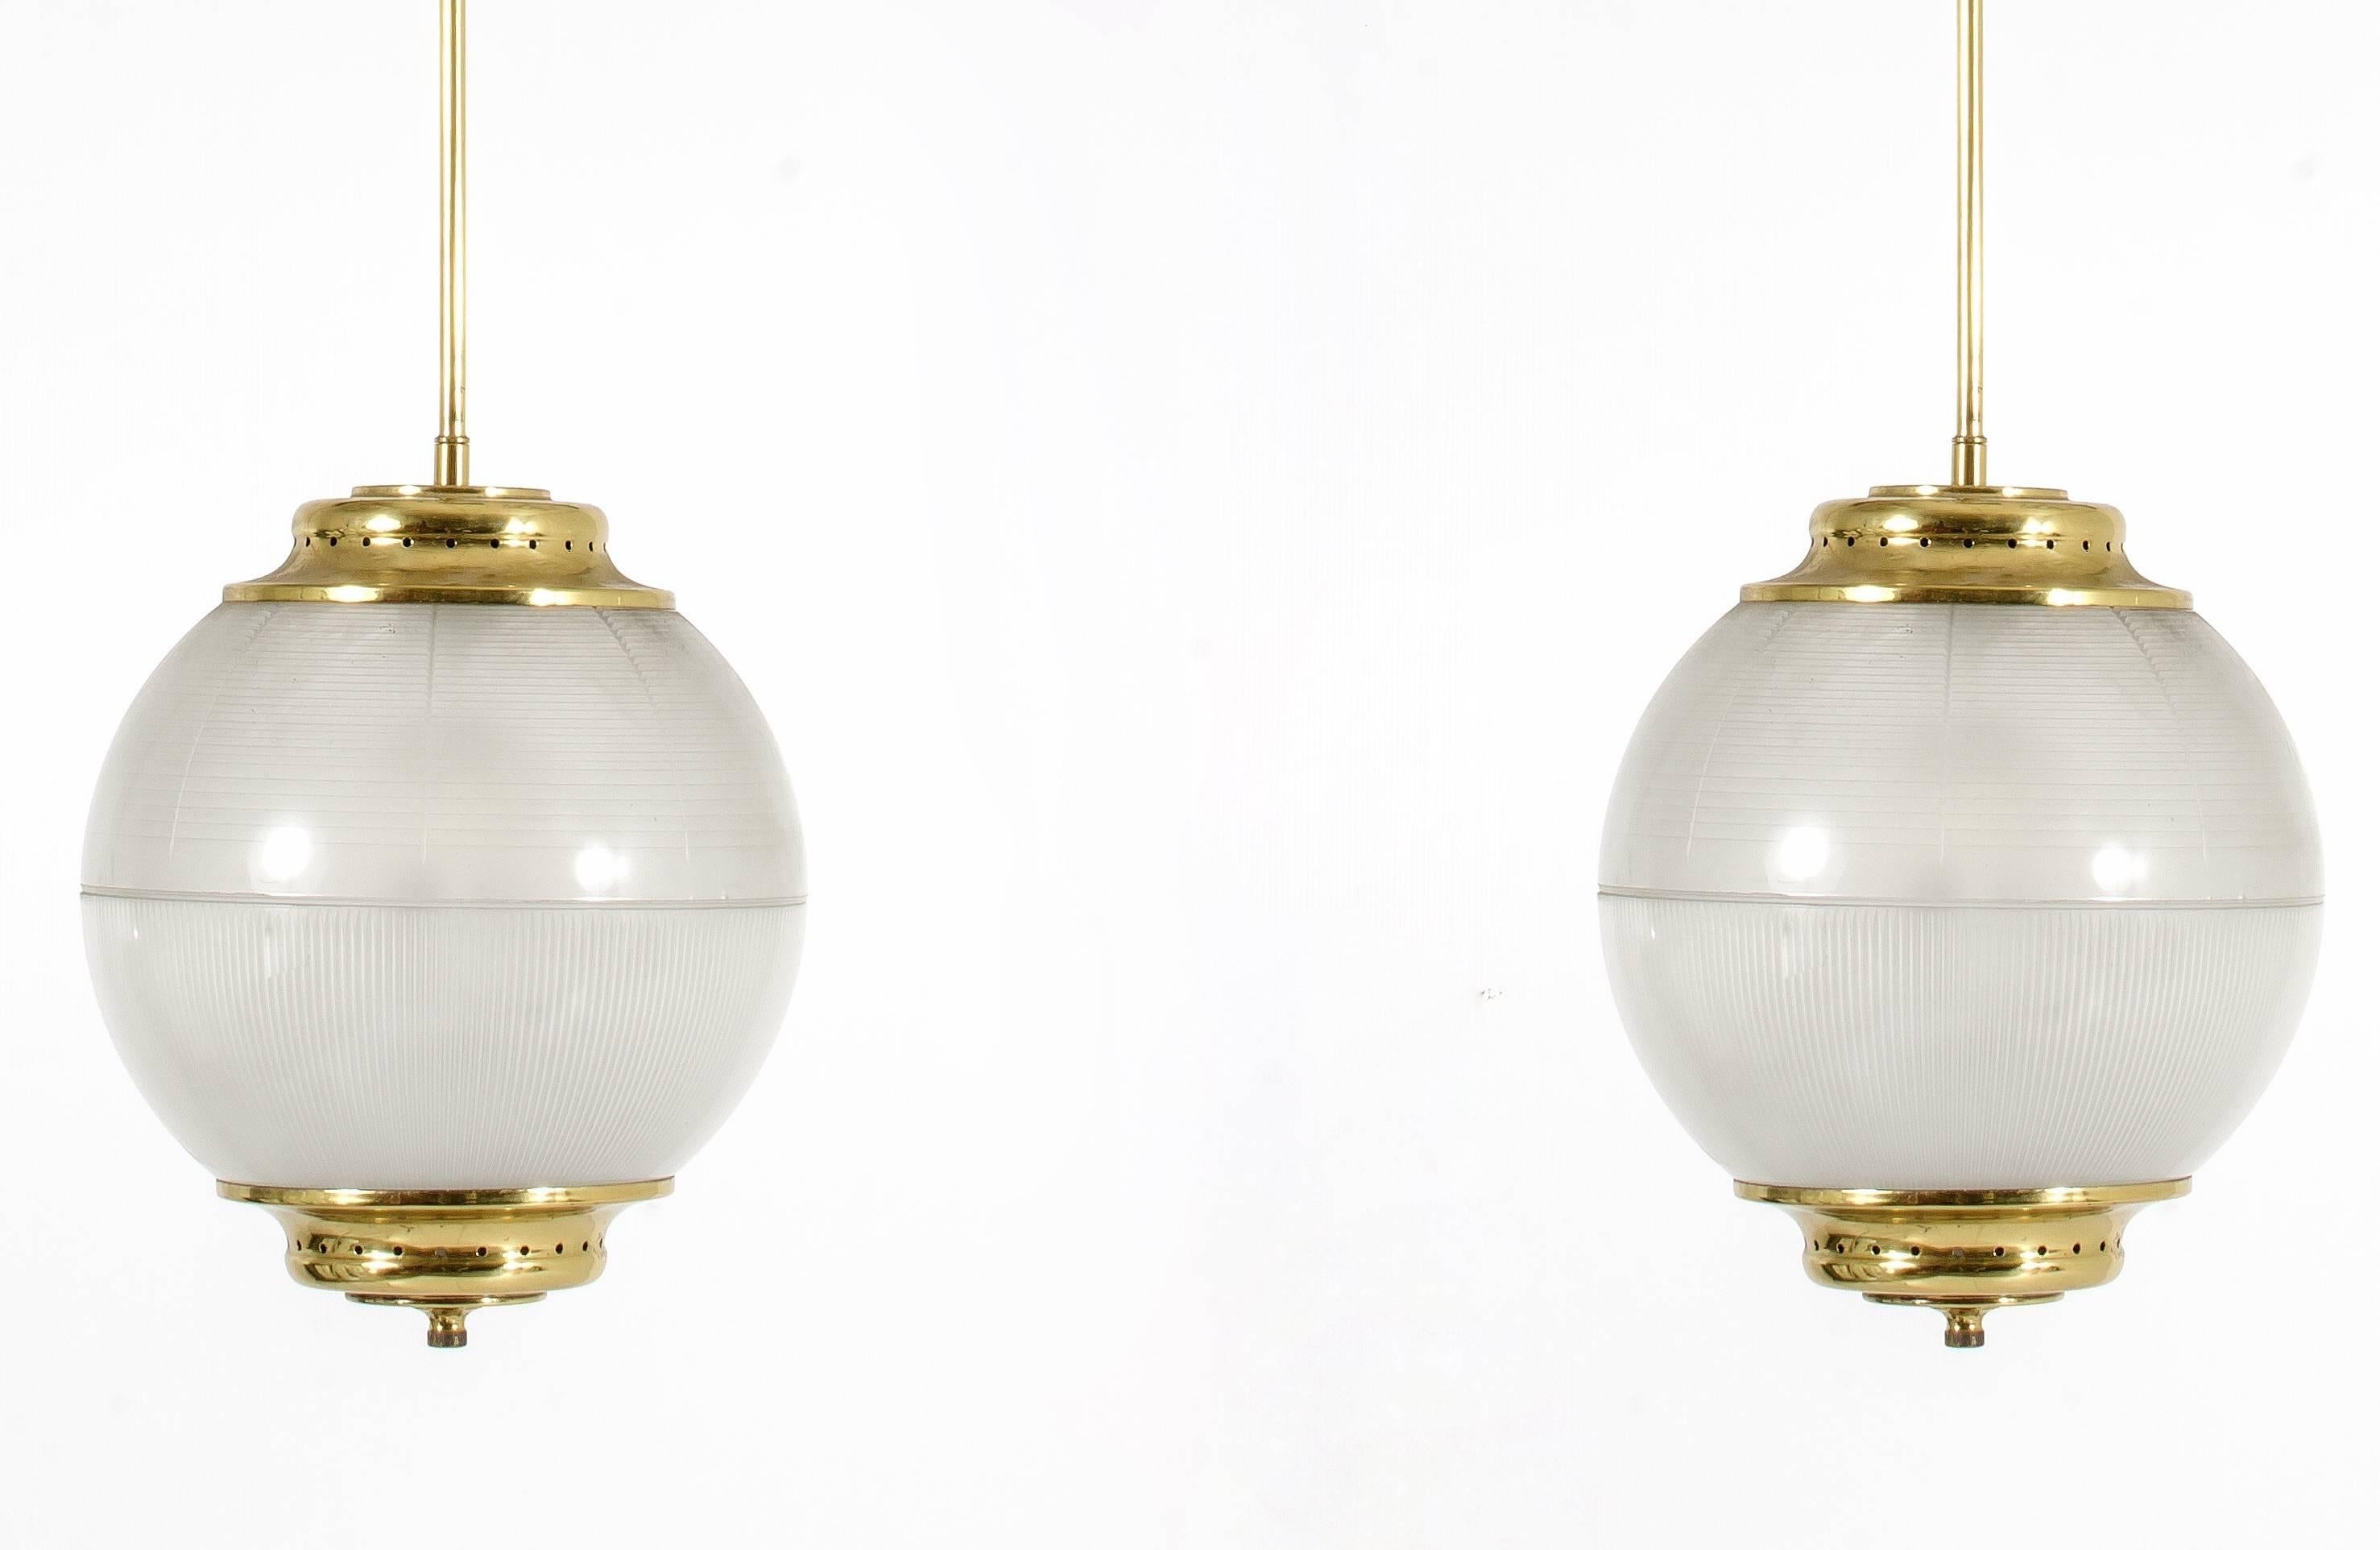 A pair of Sergio Mazza style chandeliers manufactured in 1950. Pressed glass shades and brass frames.
Excellent condition.